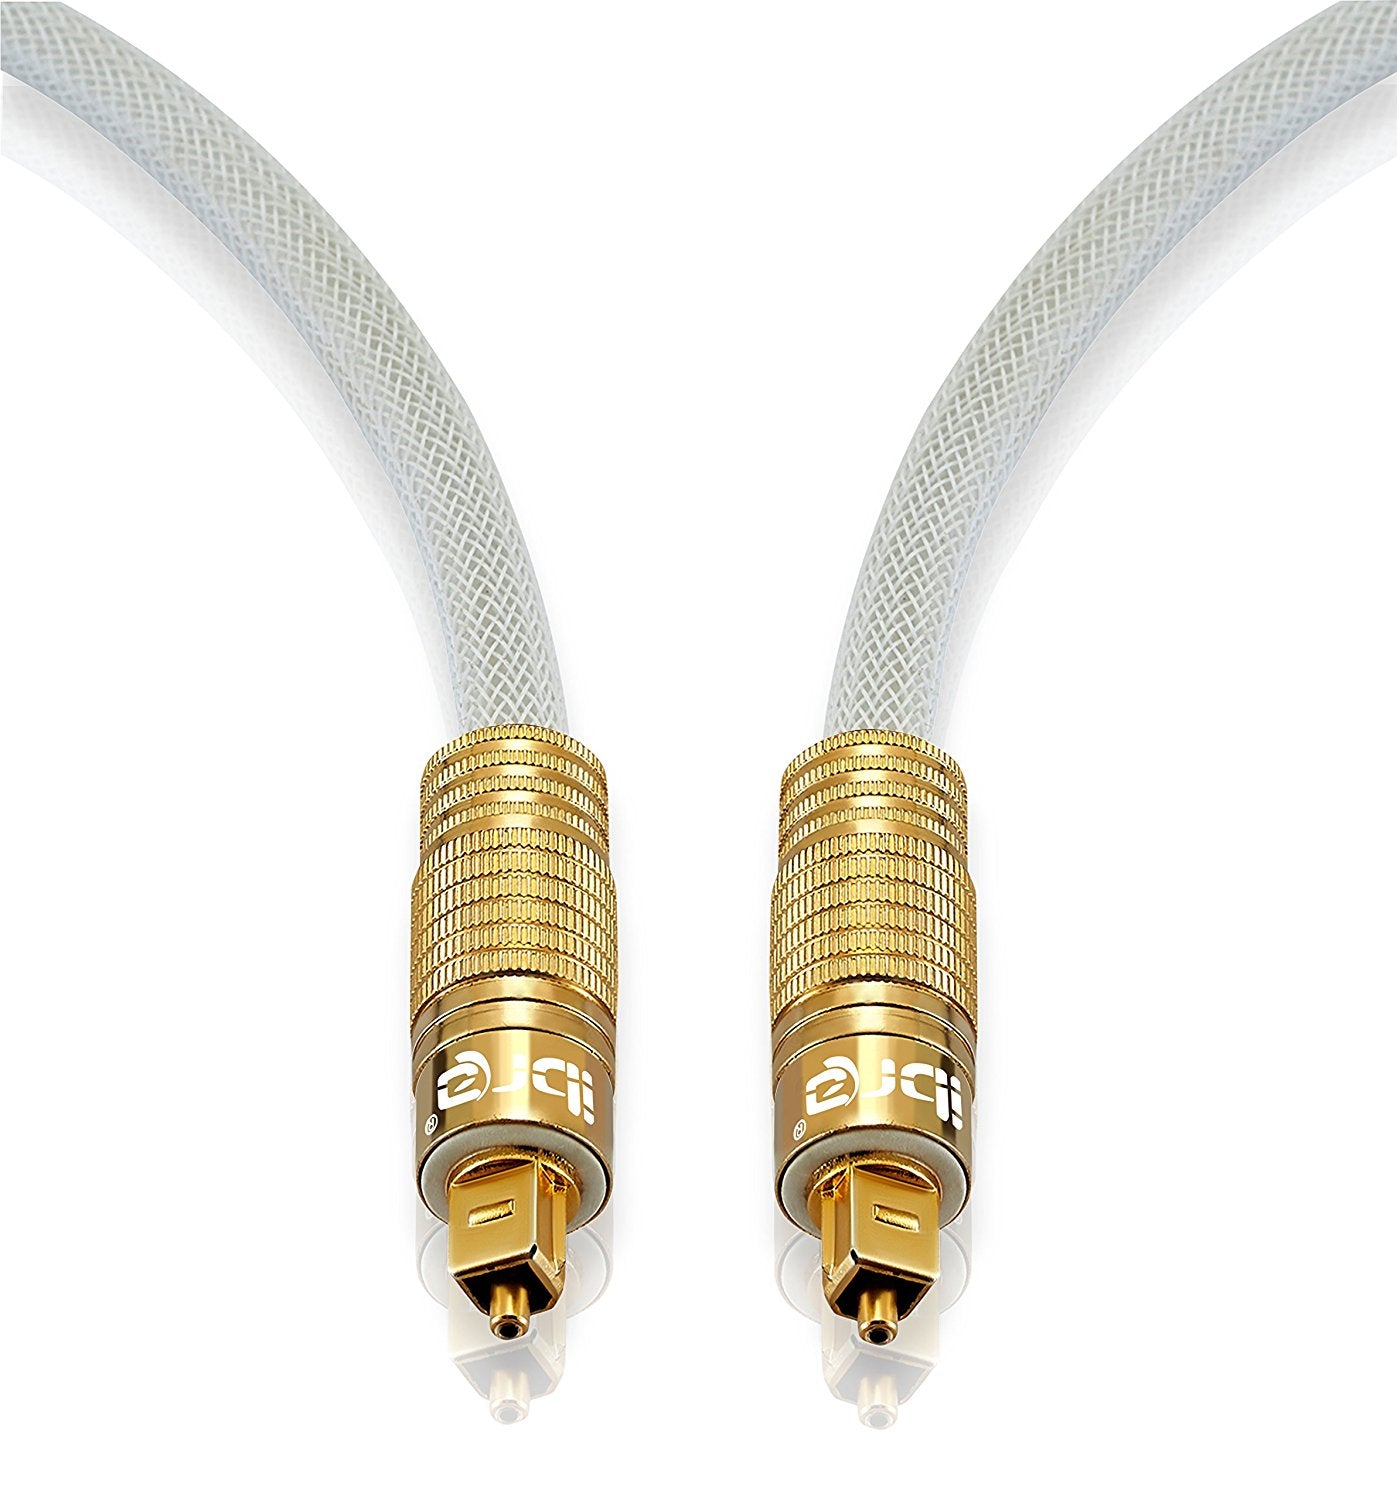 Optical Toslink Digital Audio Cable - 24K Gold Casing - Suitable for PS3,Sky,Sky HD,LCD,LED,Plasma, Blu Ray to Connect with Home Cinema Systems,AV Amps - 1M - IBRA PREMIUM WHITE